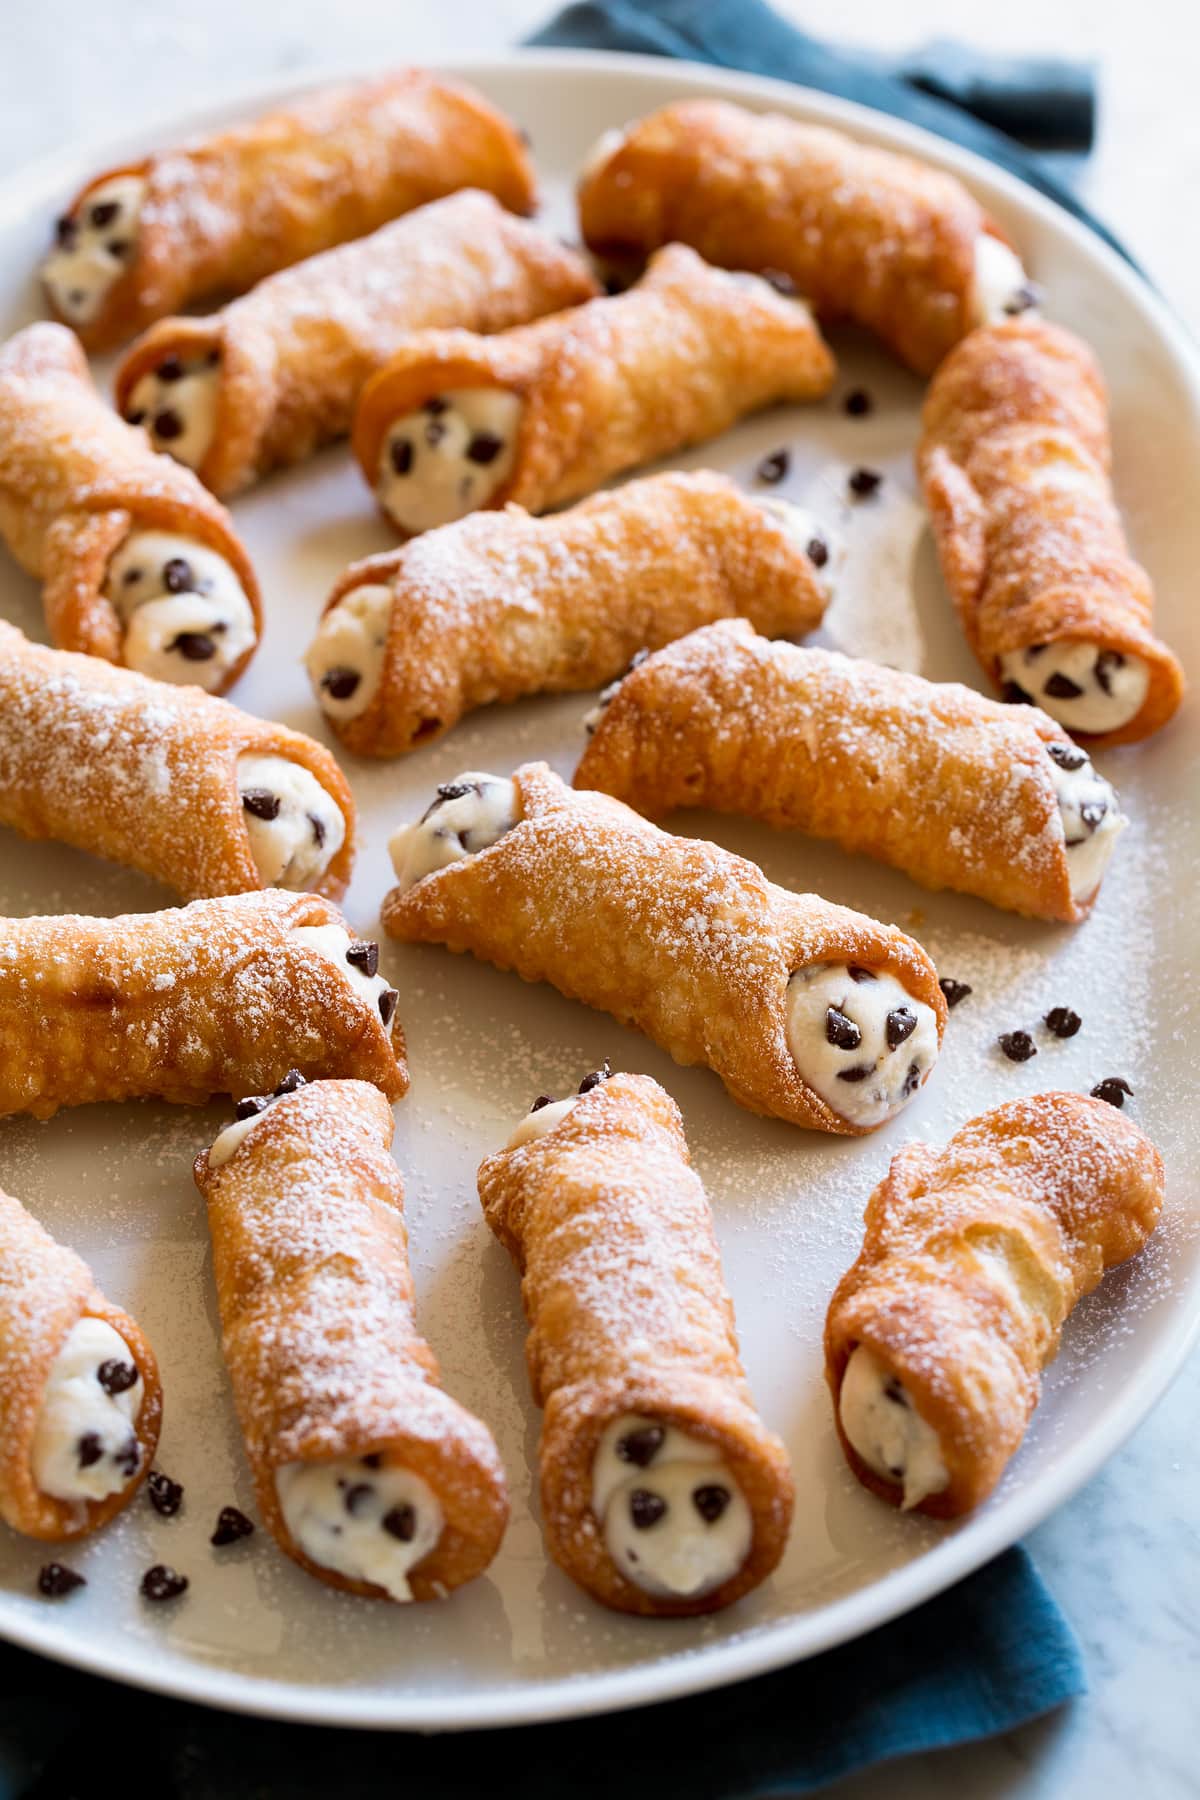 Cannoli with ricotta and chocolate chip filling on a white serving platter.